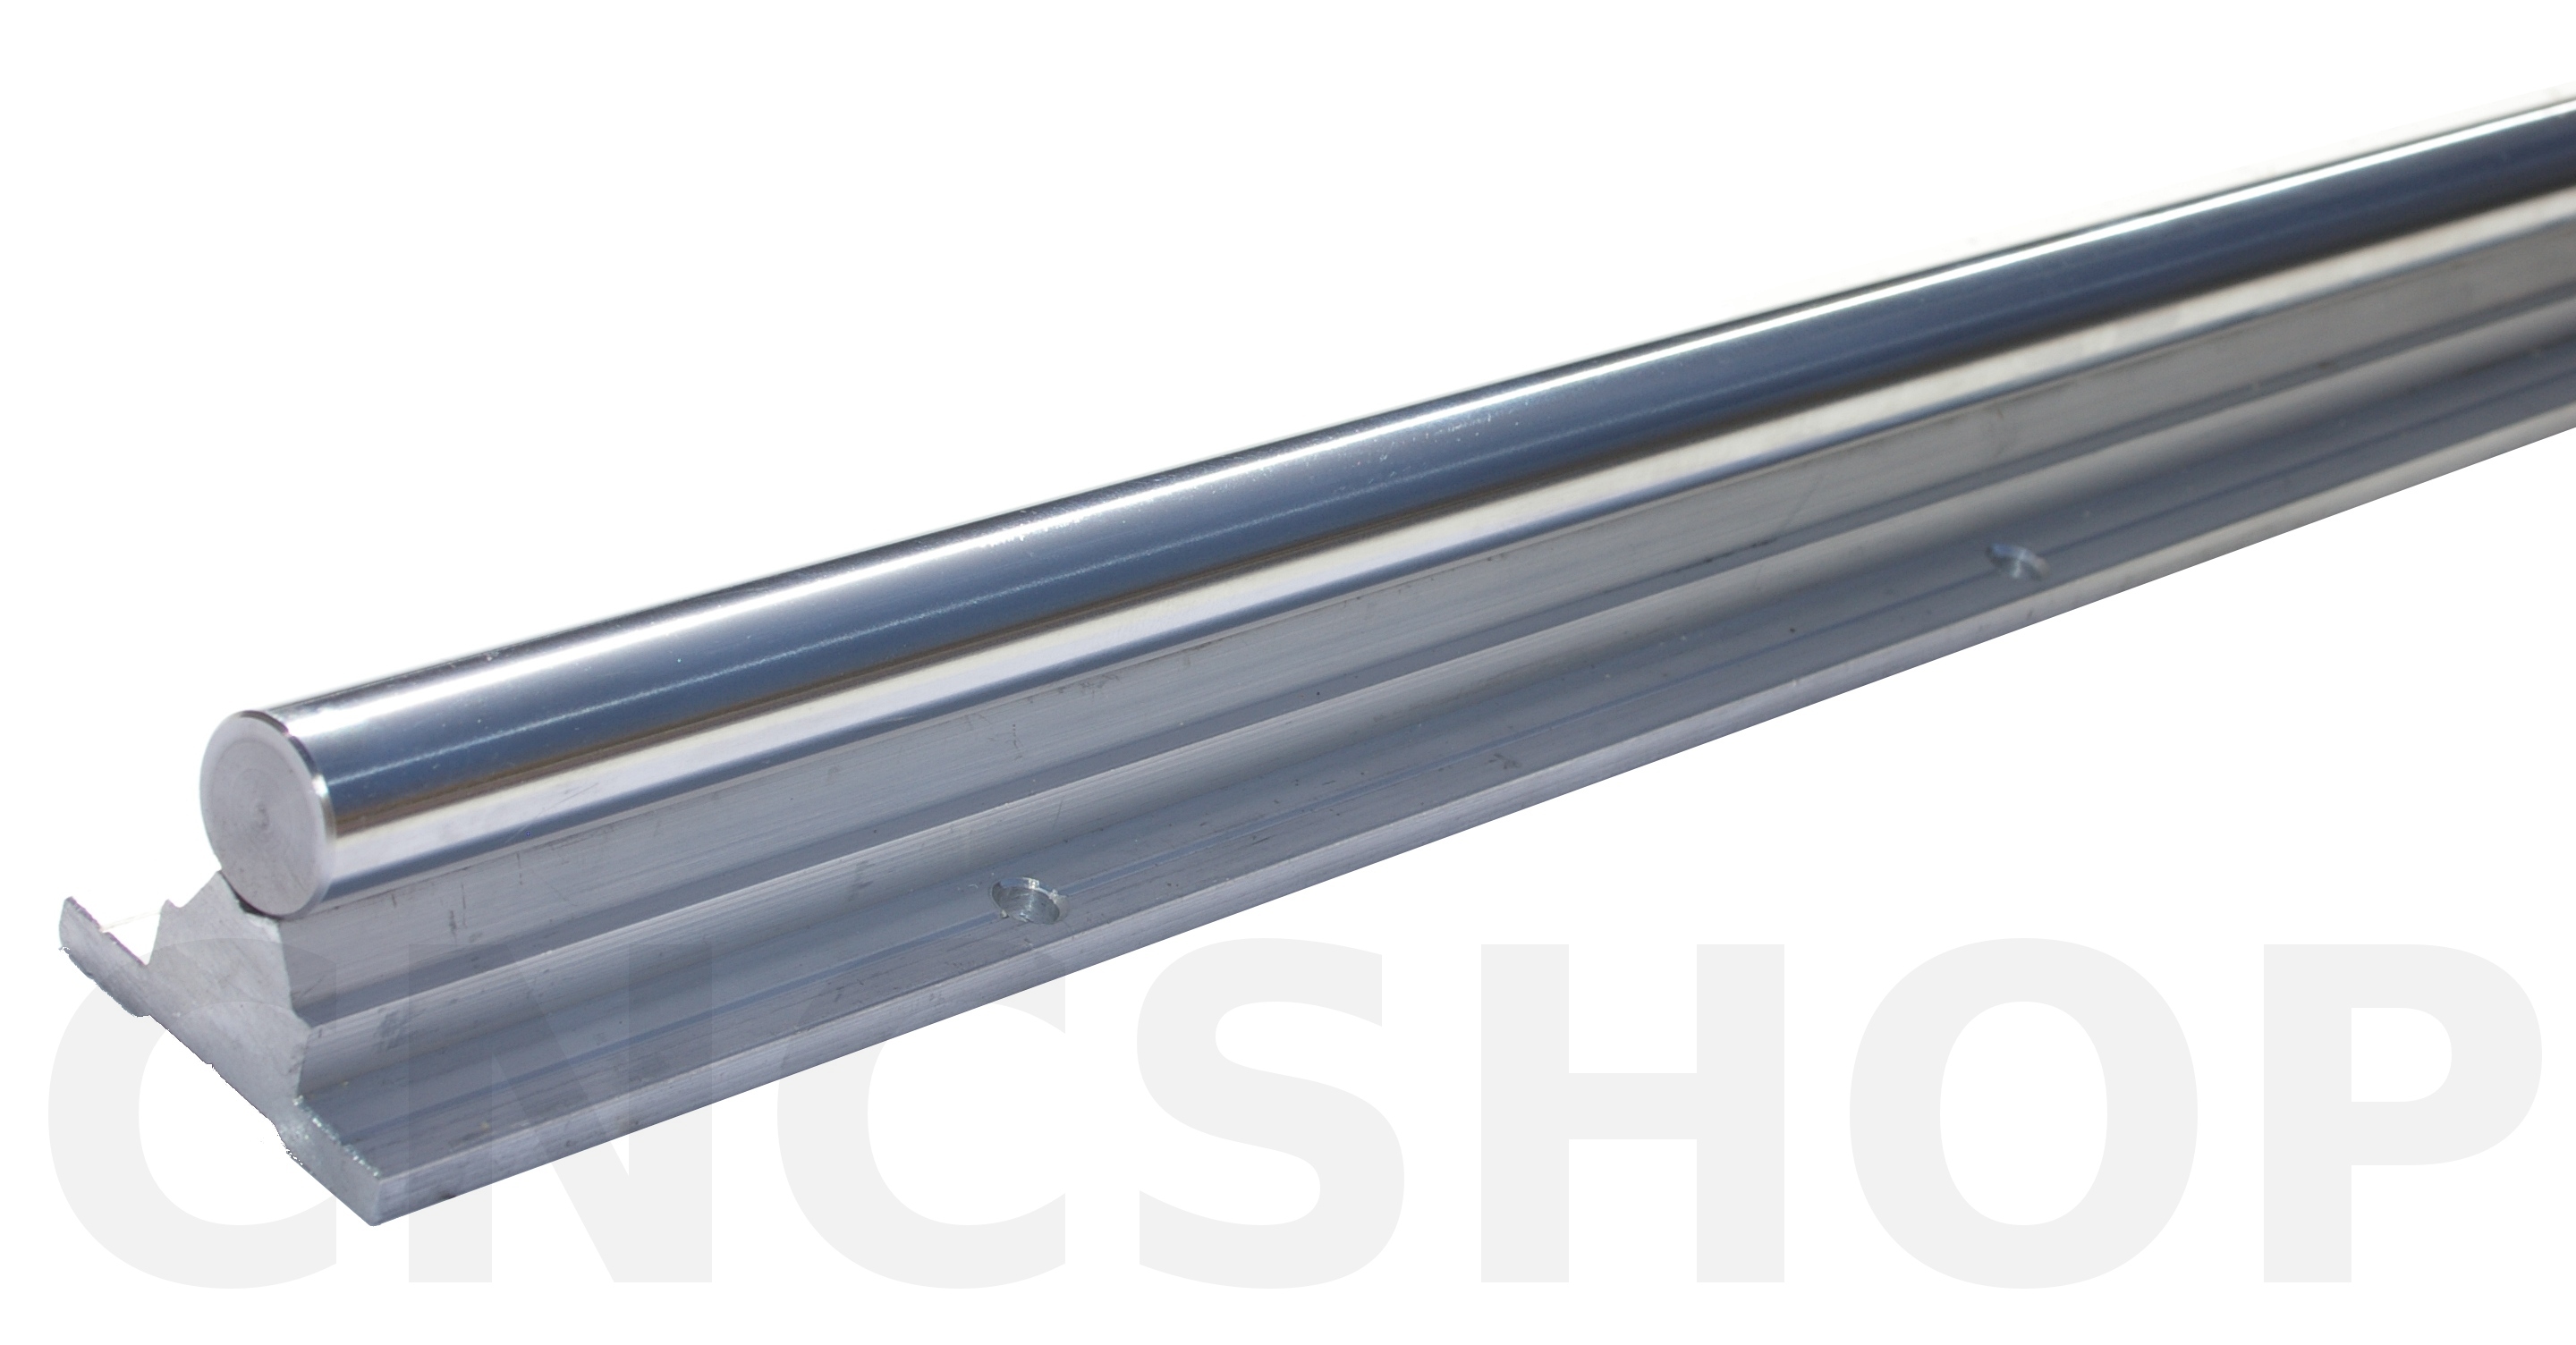 SBR16-400mm FULLY SUPPORTED LINEAR RAIL